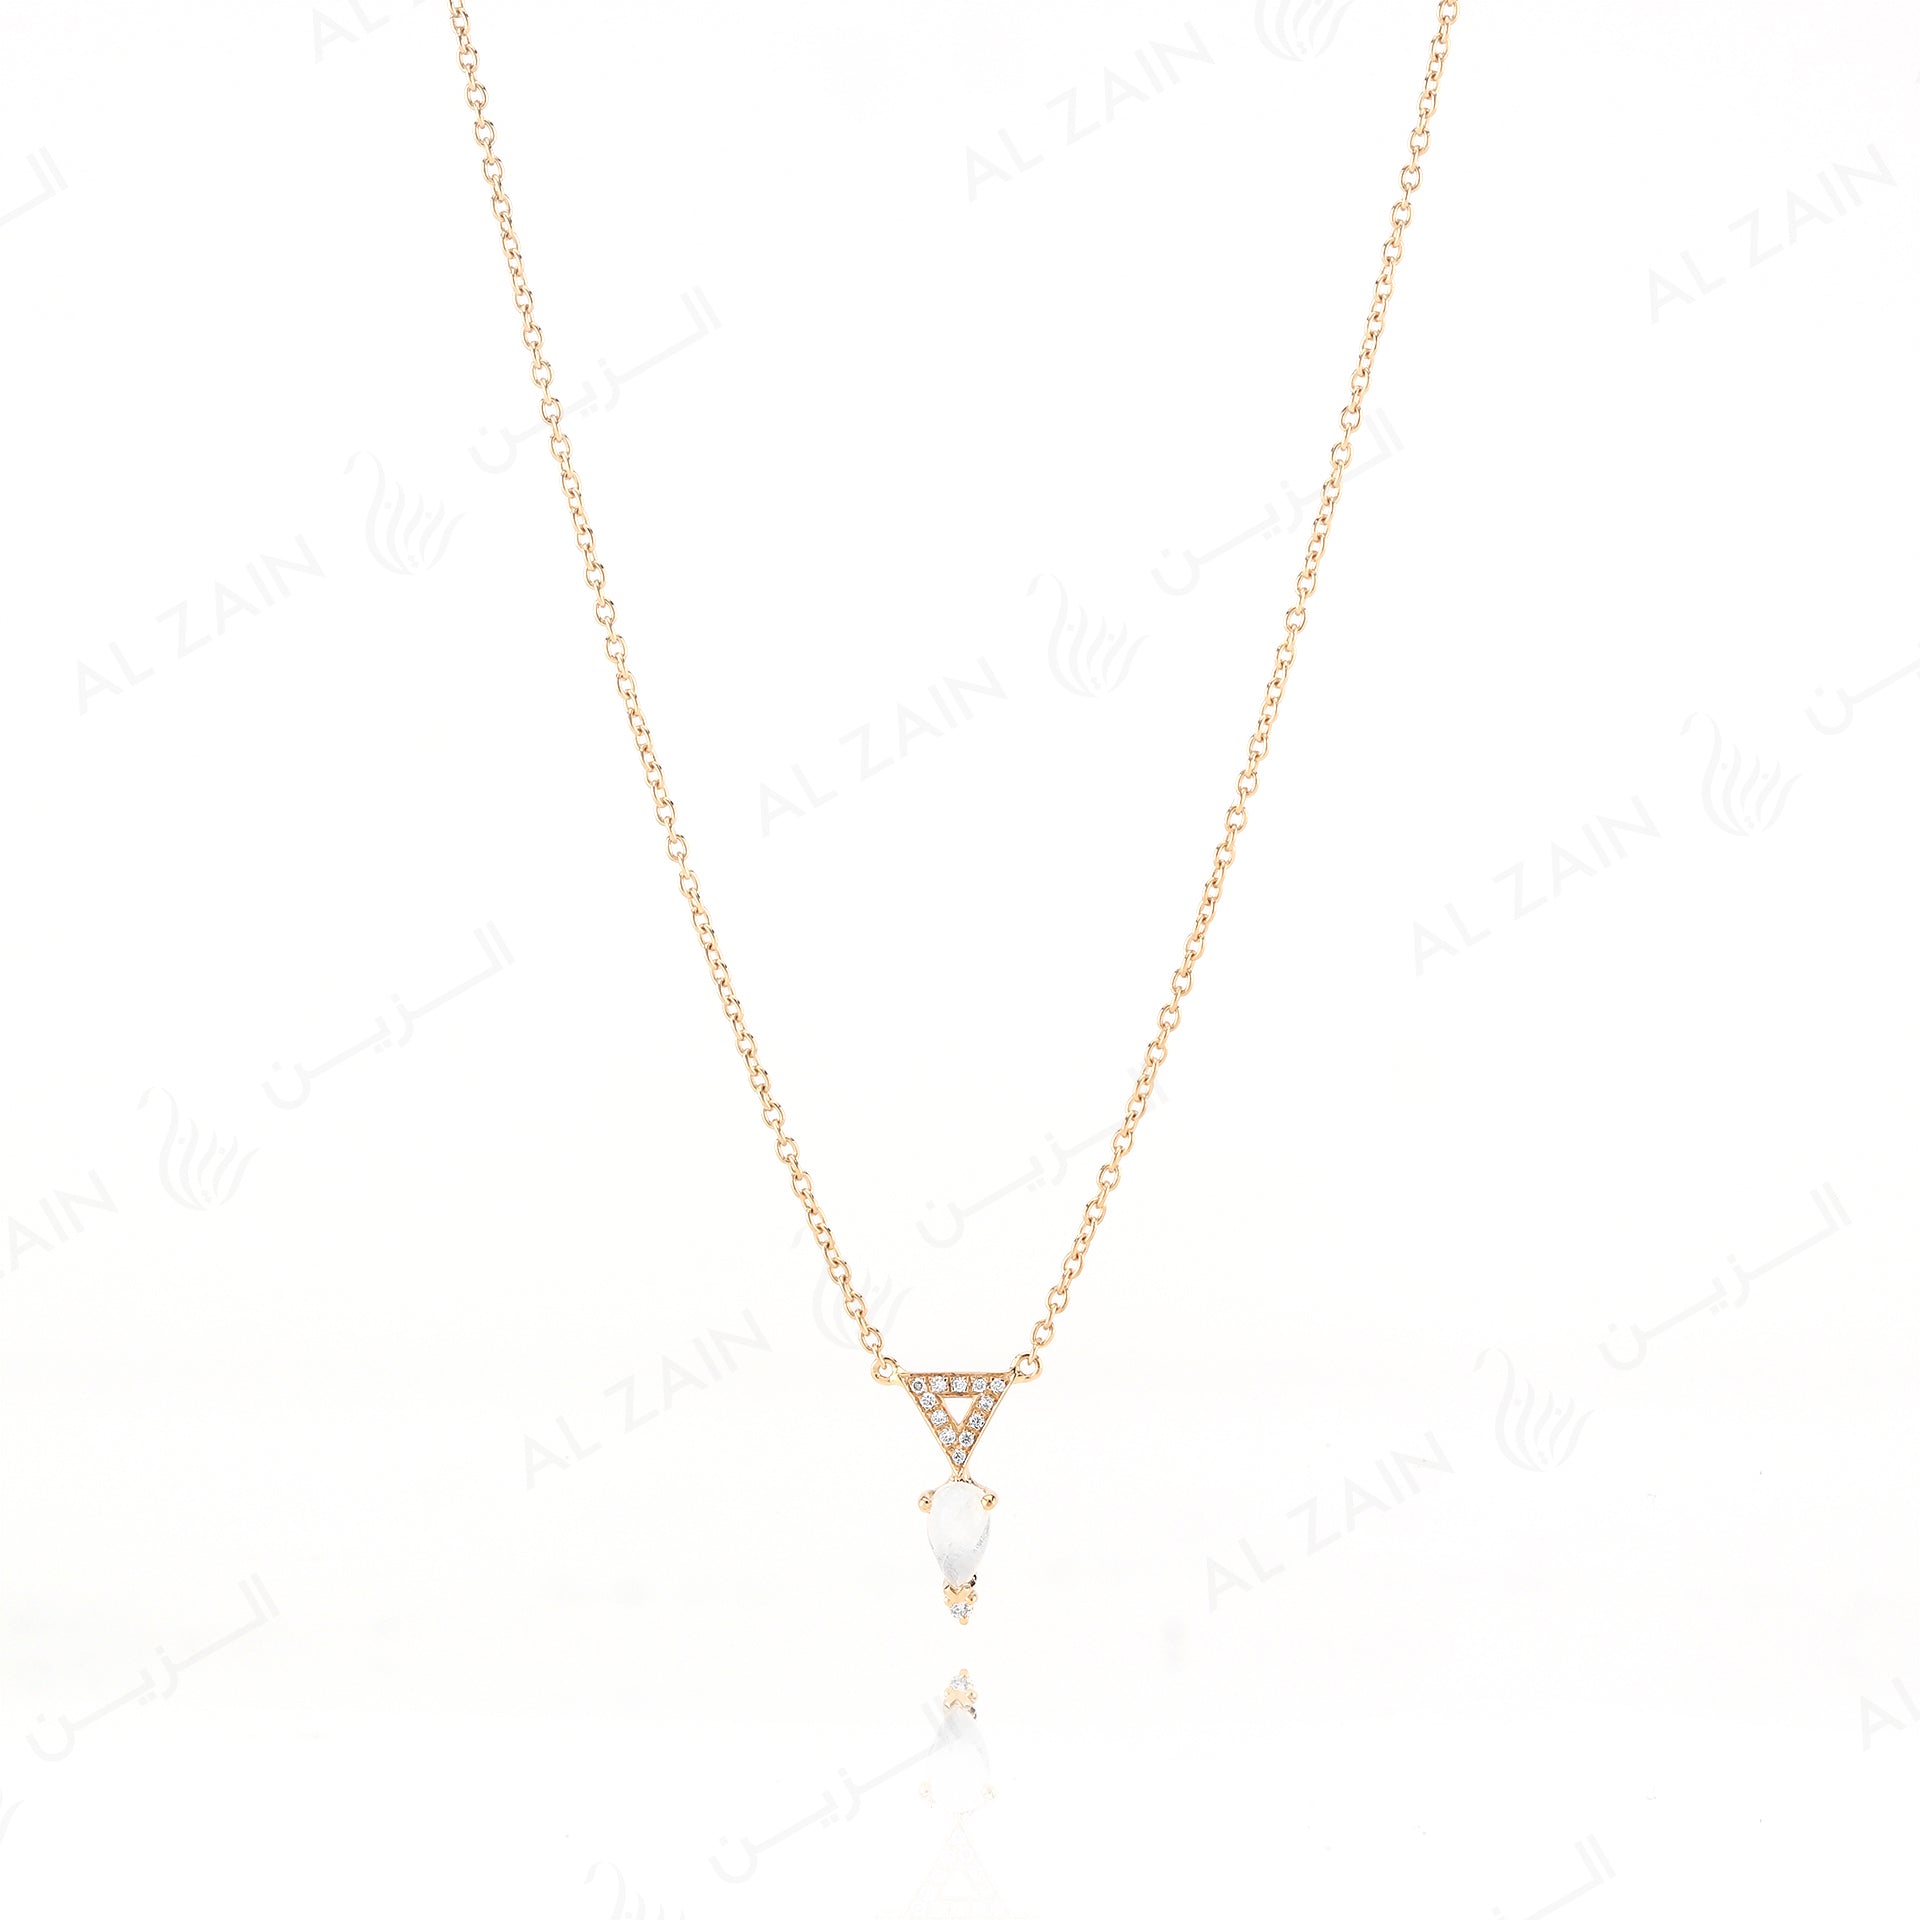 Melati triangle necklace in Yellow Gold with Moon Stone and Diamonds